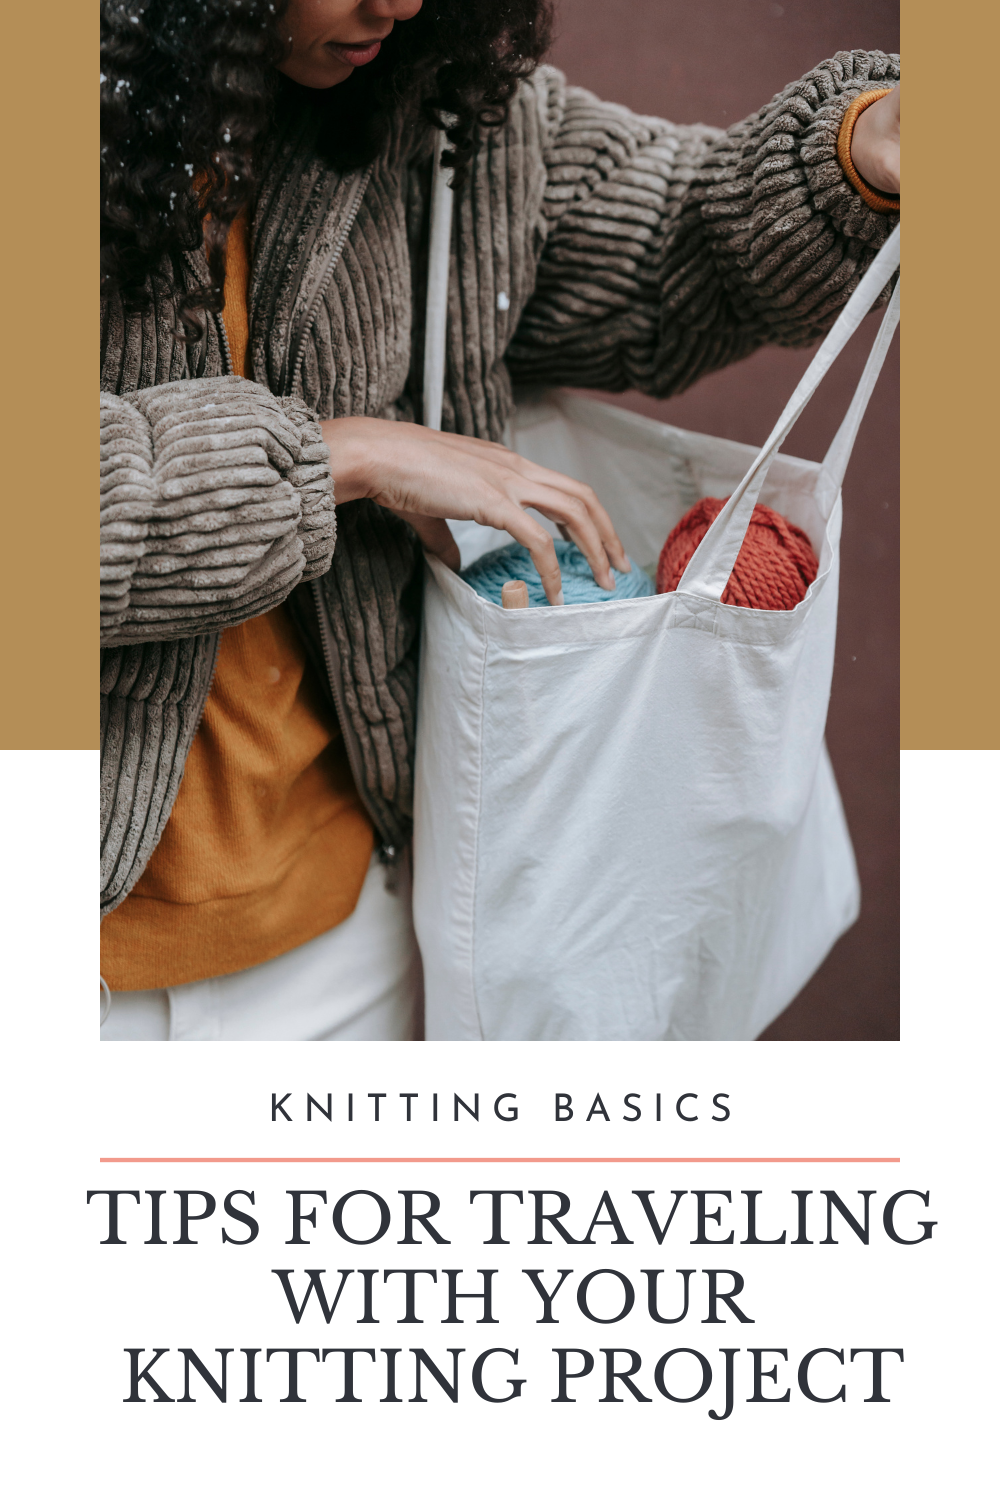 How to create a knitting kit for on the go projects and traveling with your knitting.